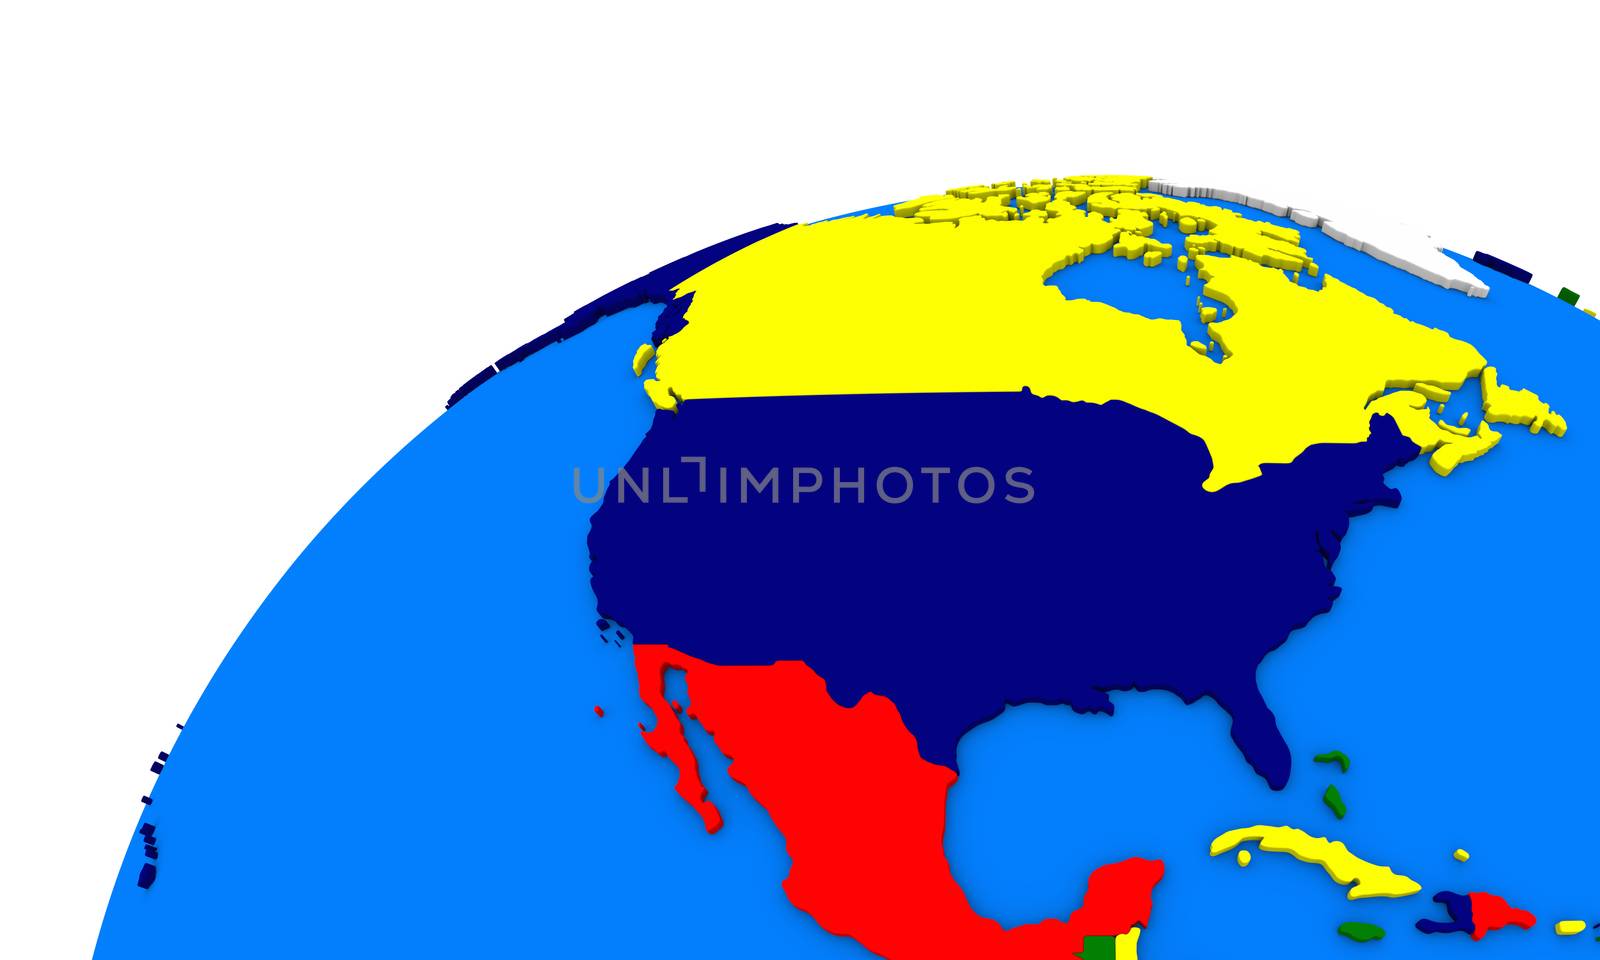 north America on Earth political map by Harvepino